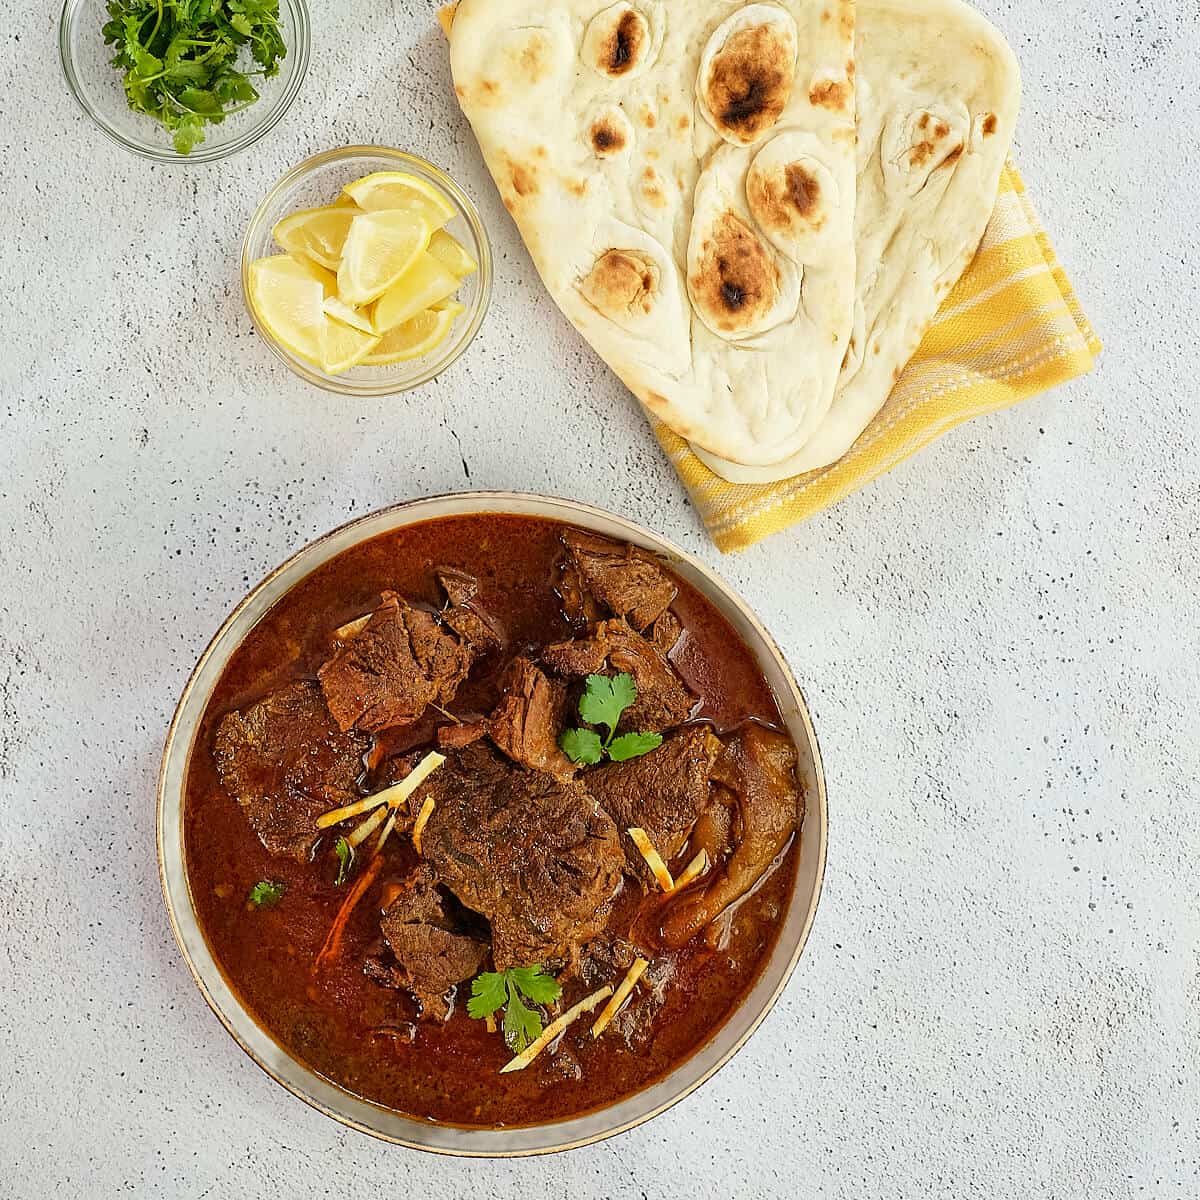 Close up view of Indian beef curry with naan bread.